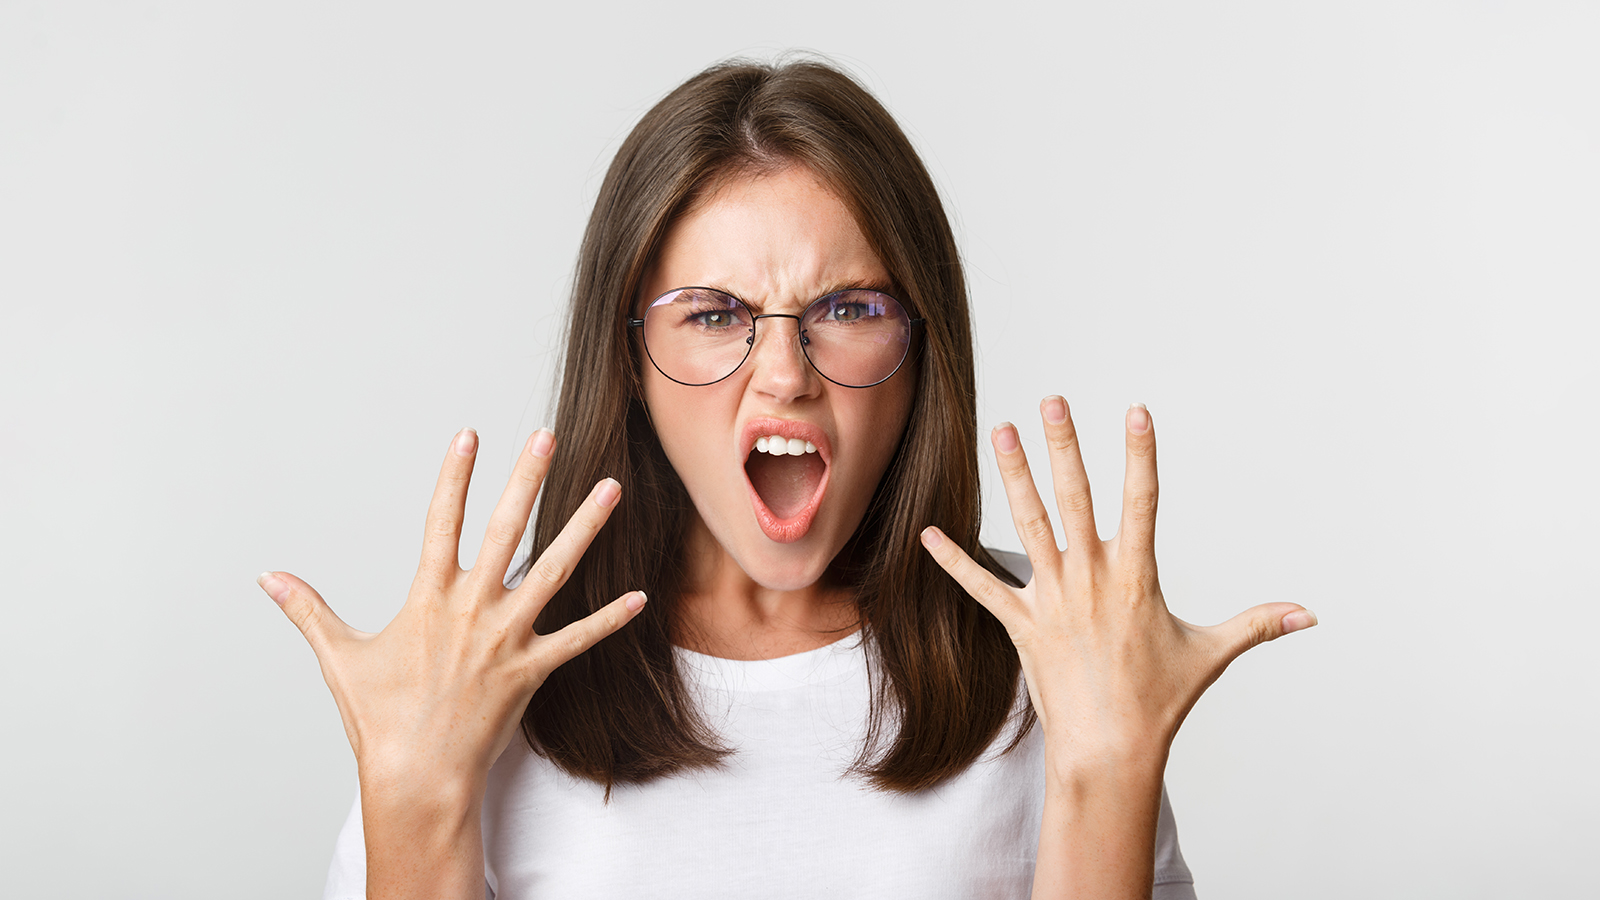 Close-up of angry and furious young woman in glasses arguing, complaining over white background